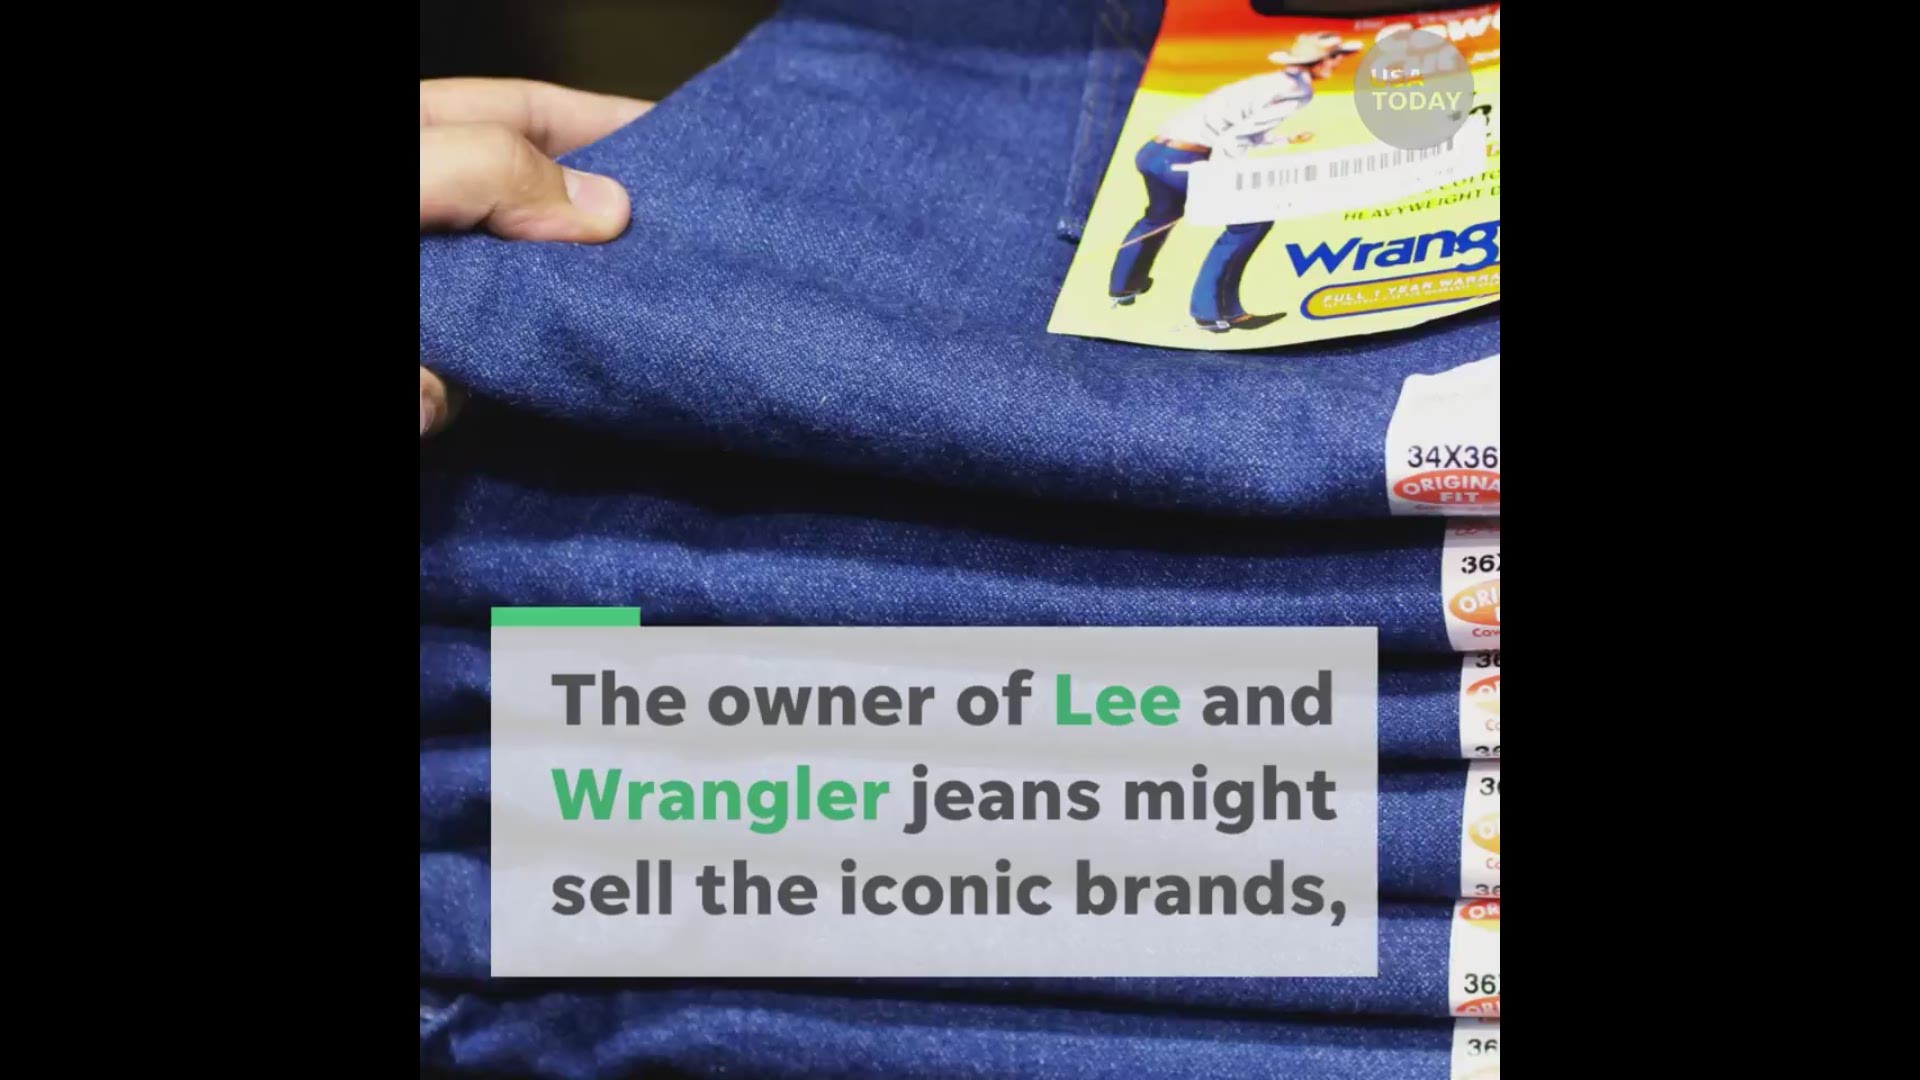 Report: Lee, Wrangler owner may exit the jeans business 